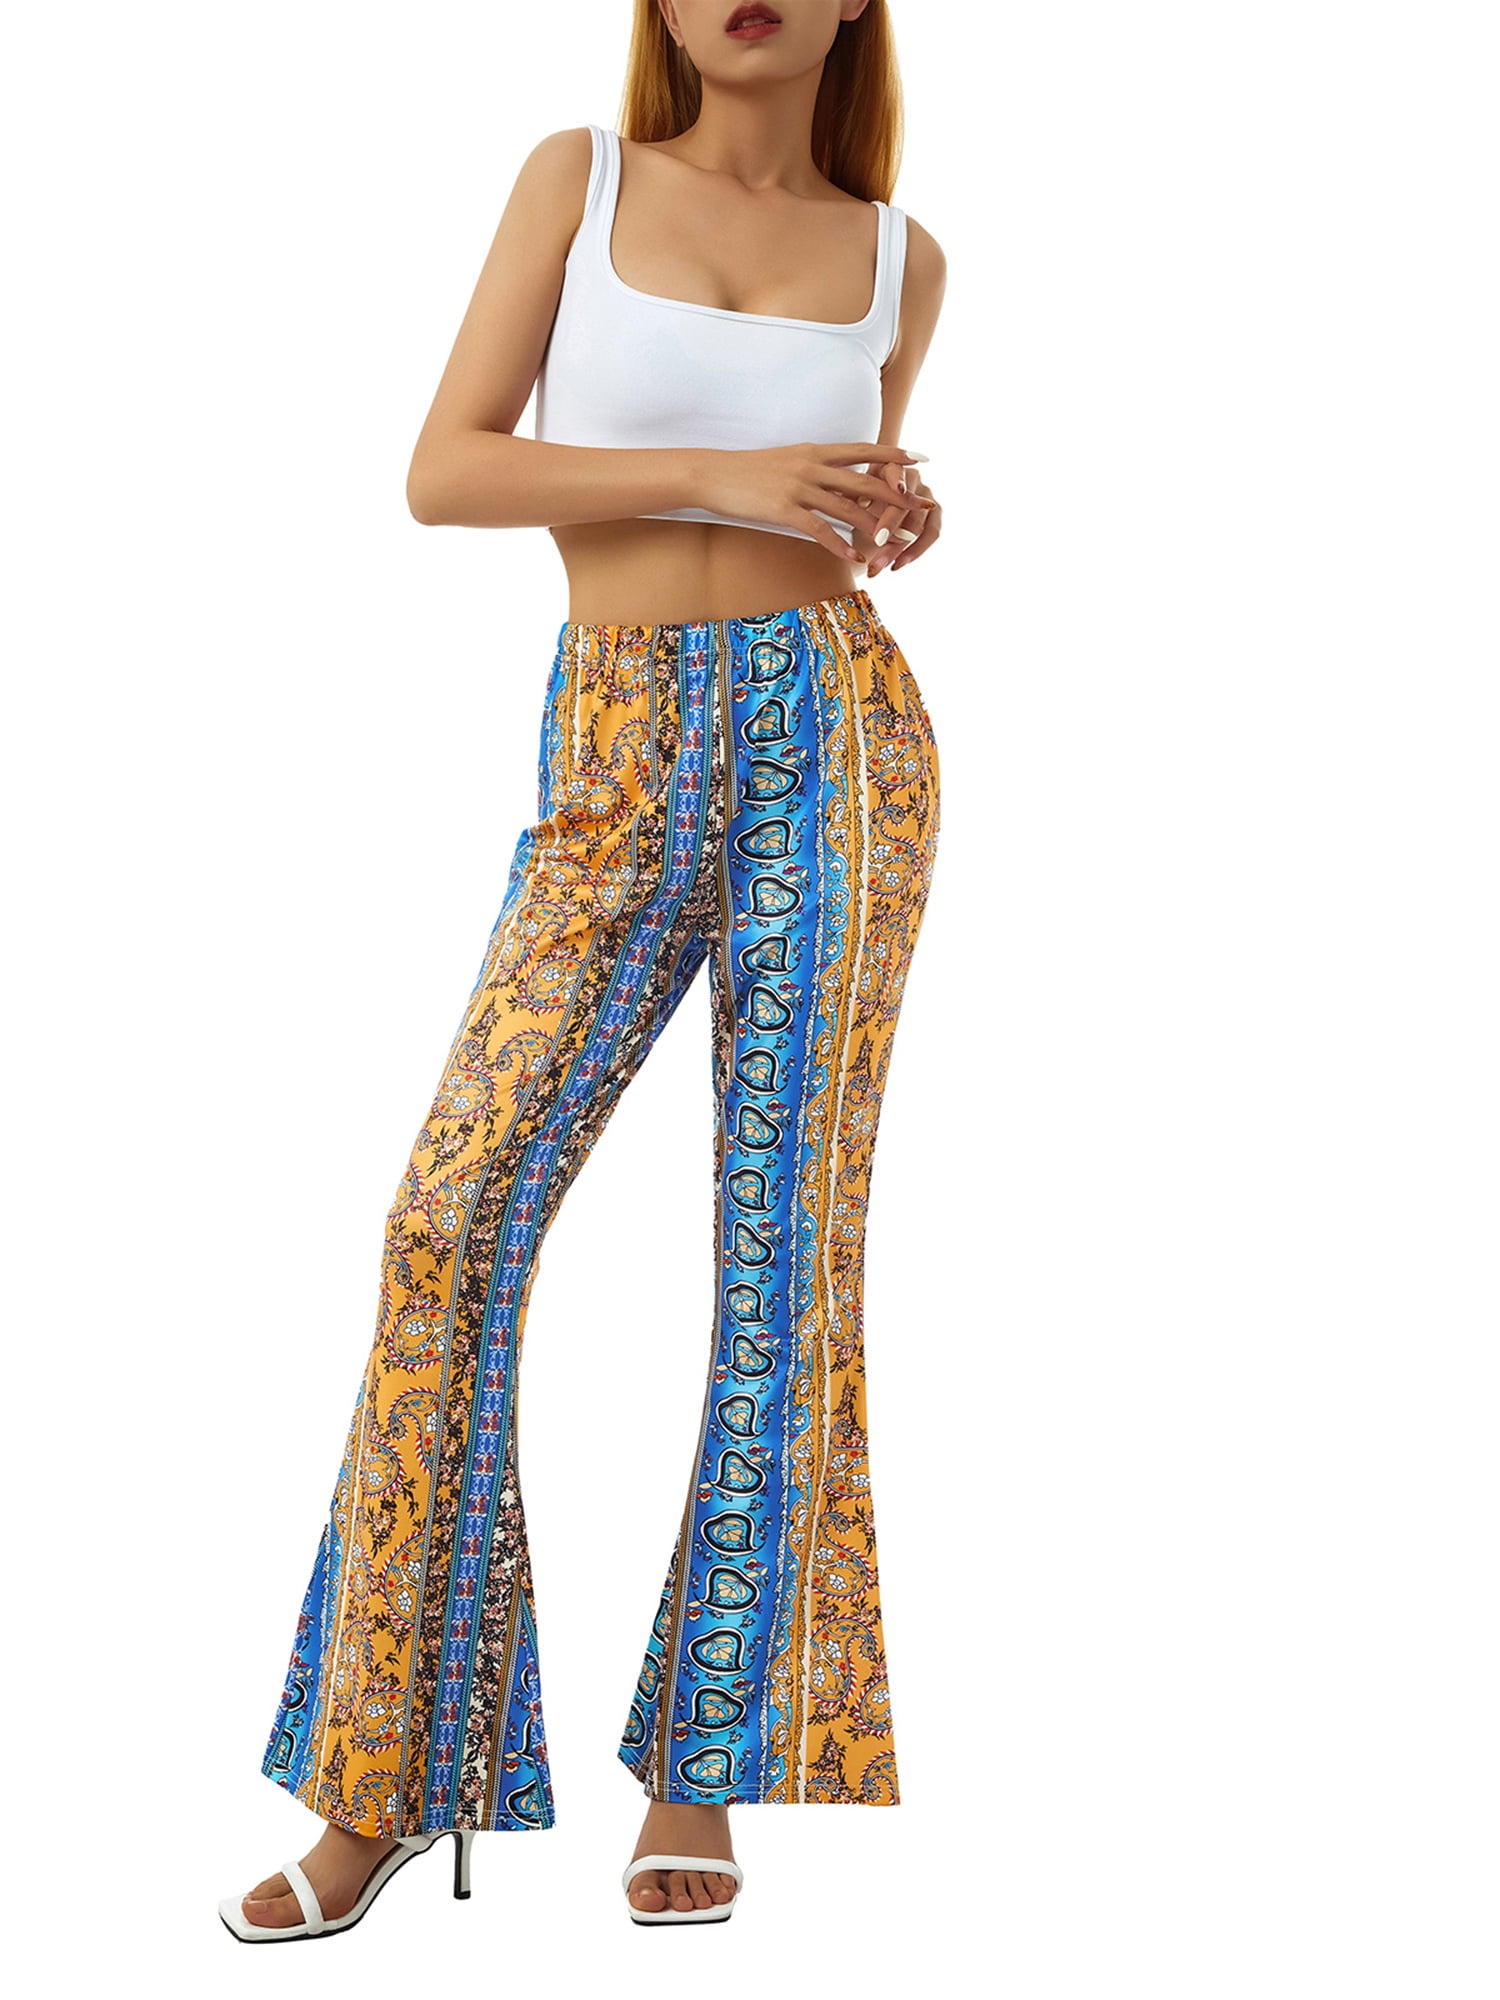 Women's Jeans Denim High Waisted Bell Bottoms Flare Pants /wide-leg With  Belt Loops&front Pockets/boho/retro/vintage 70s Fashion Style. 